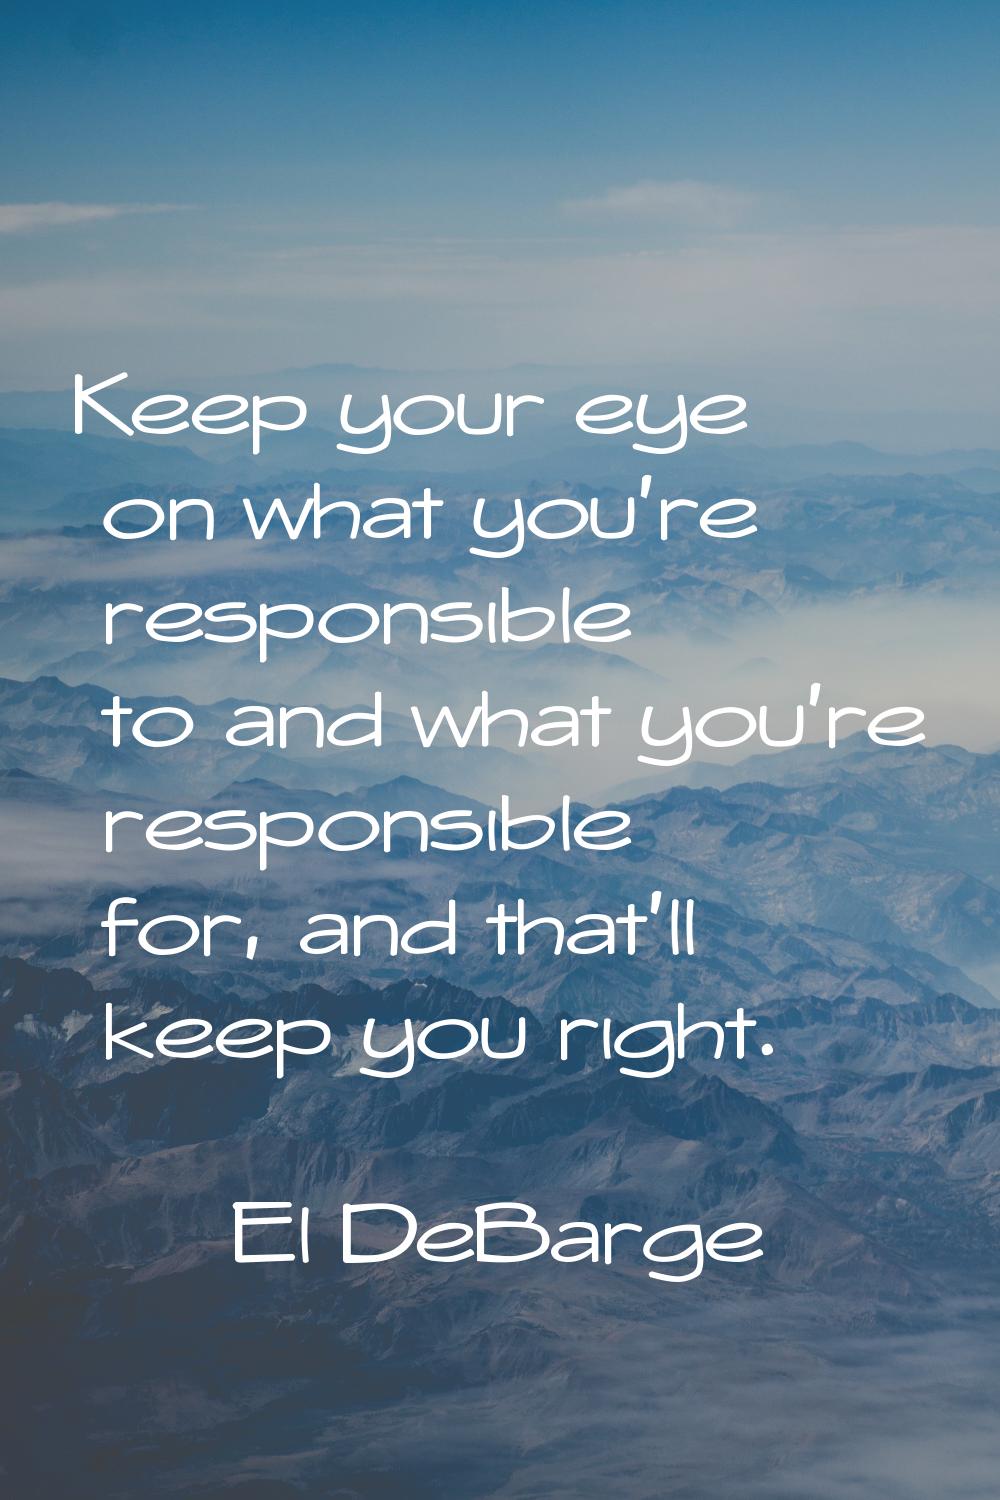 Keep your eye on what you're responsible to and what you're responsible for, and that'll keep you r